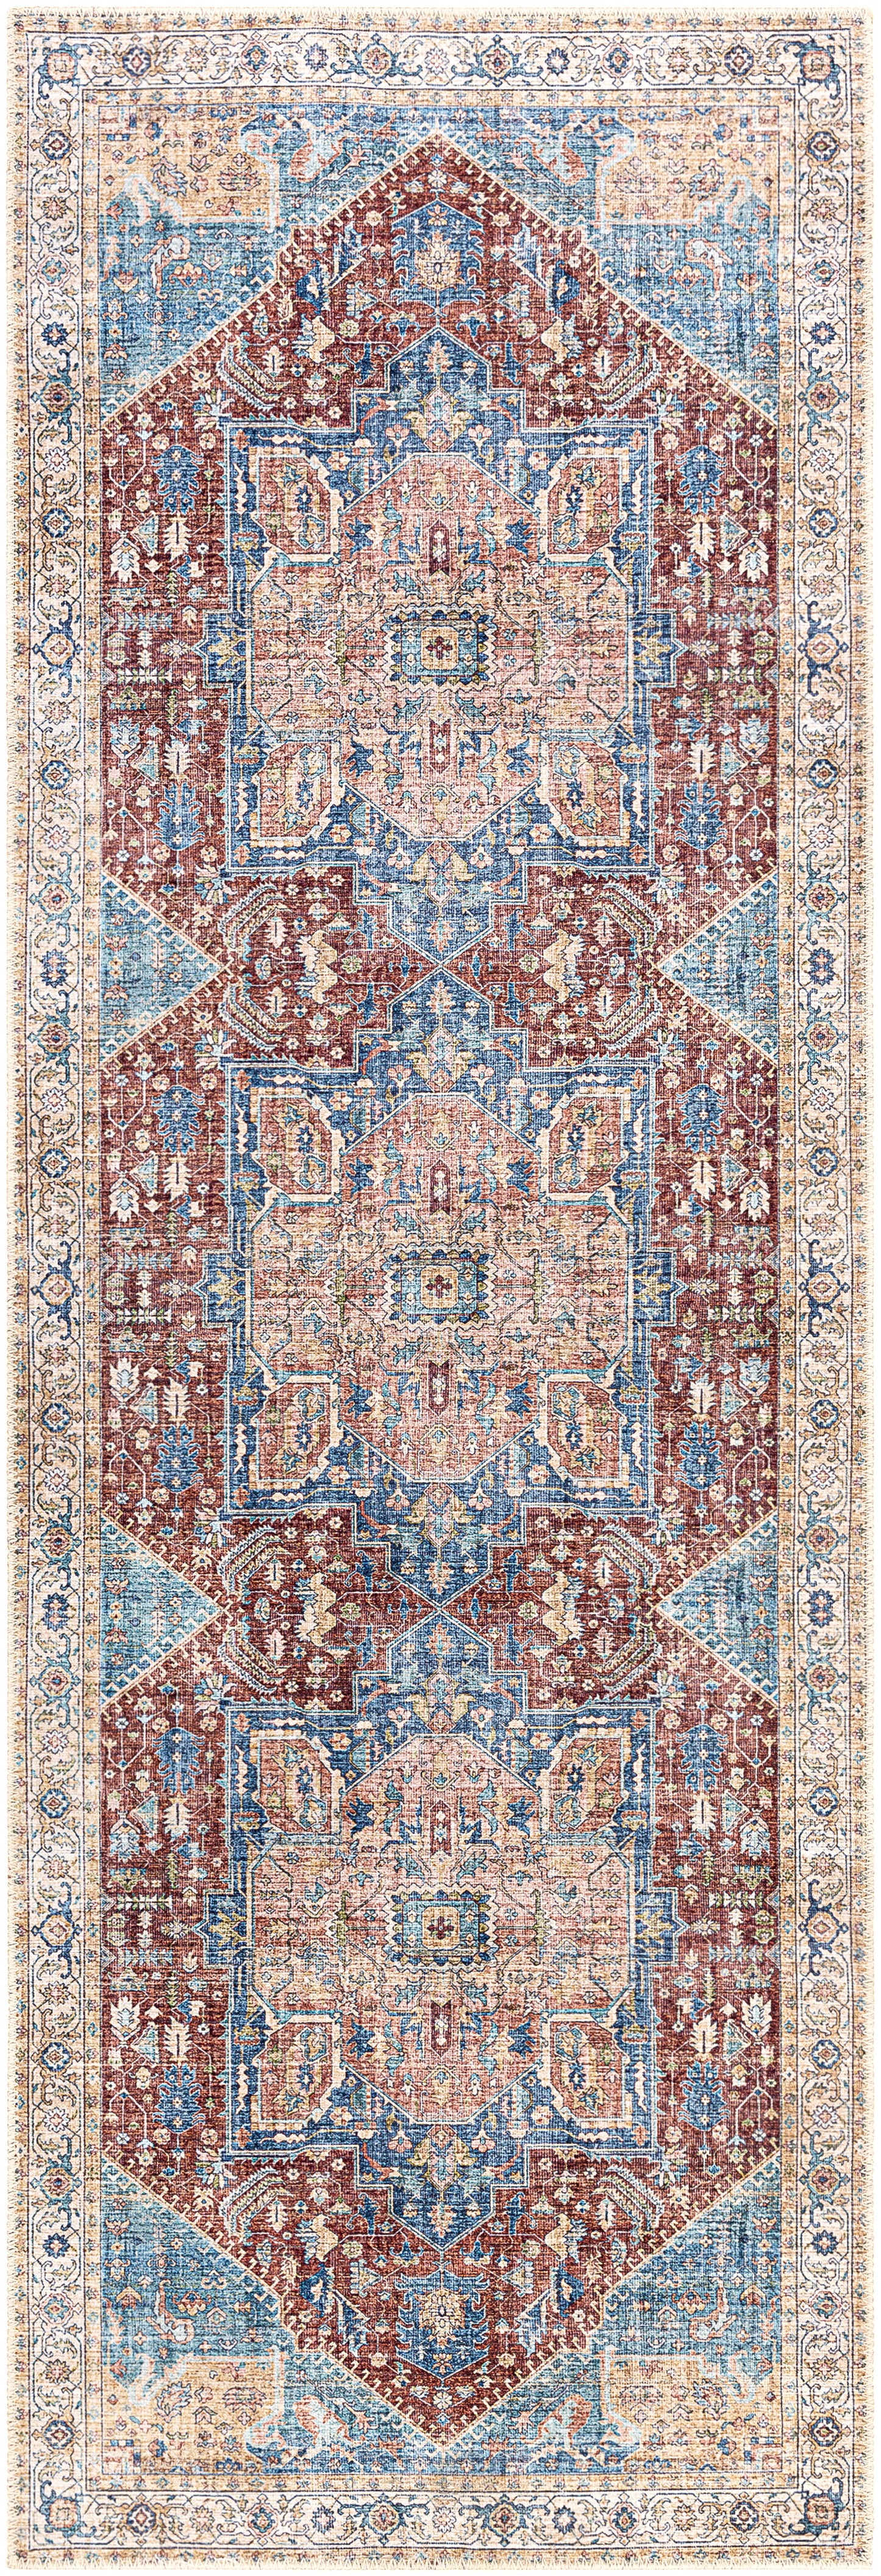 Amelie 25198 Machine Woven Synthetic Blend Indoor Area Rug by Surya Rugs